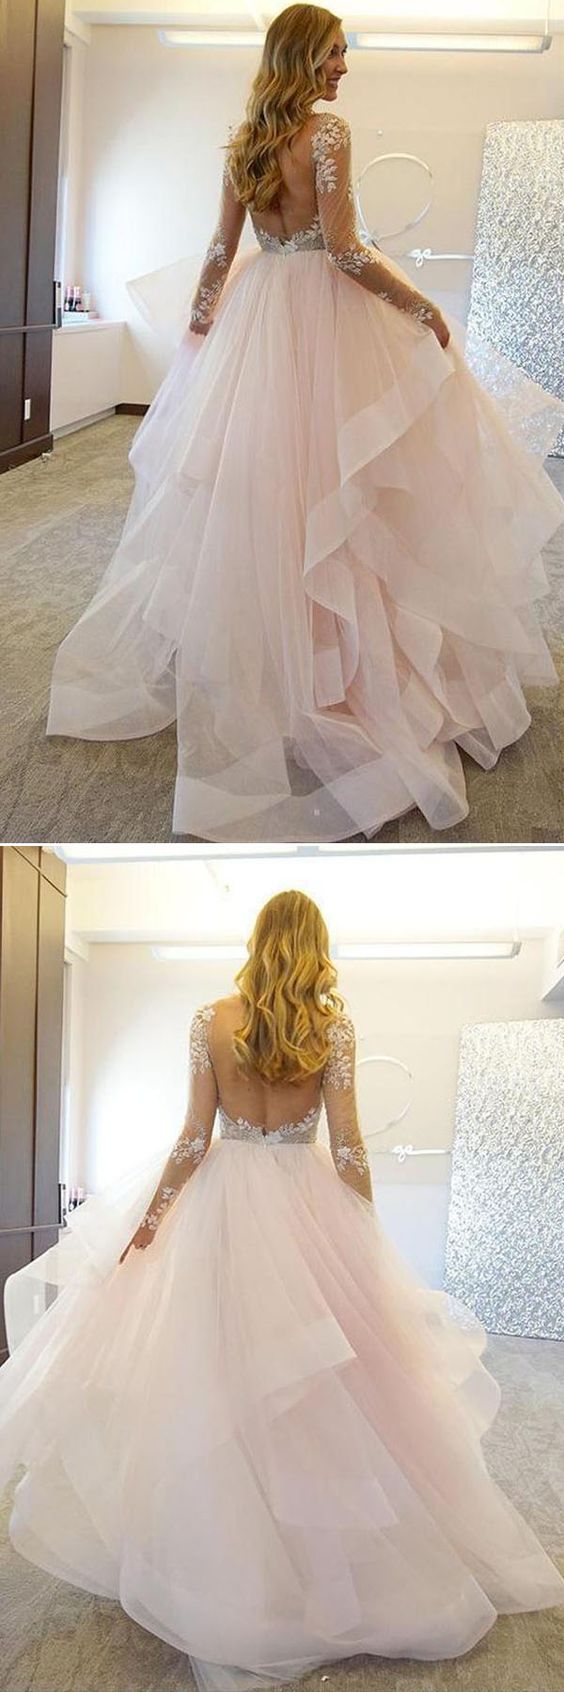 Backless Tulle Skirt Long Sleeve Princess Ruffle Wedding Dress with Sleeves GDC1131-Dolly Gown